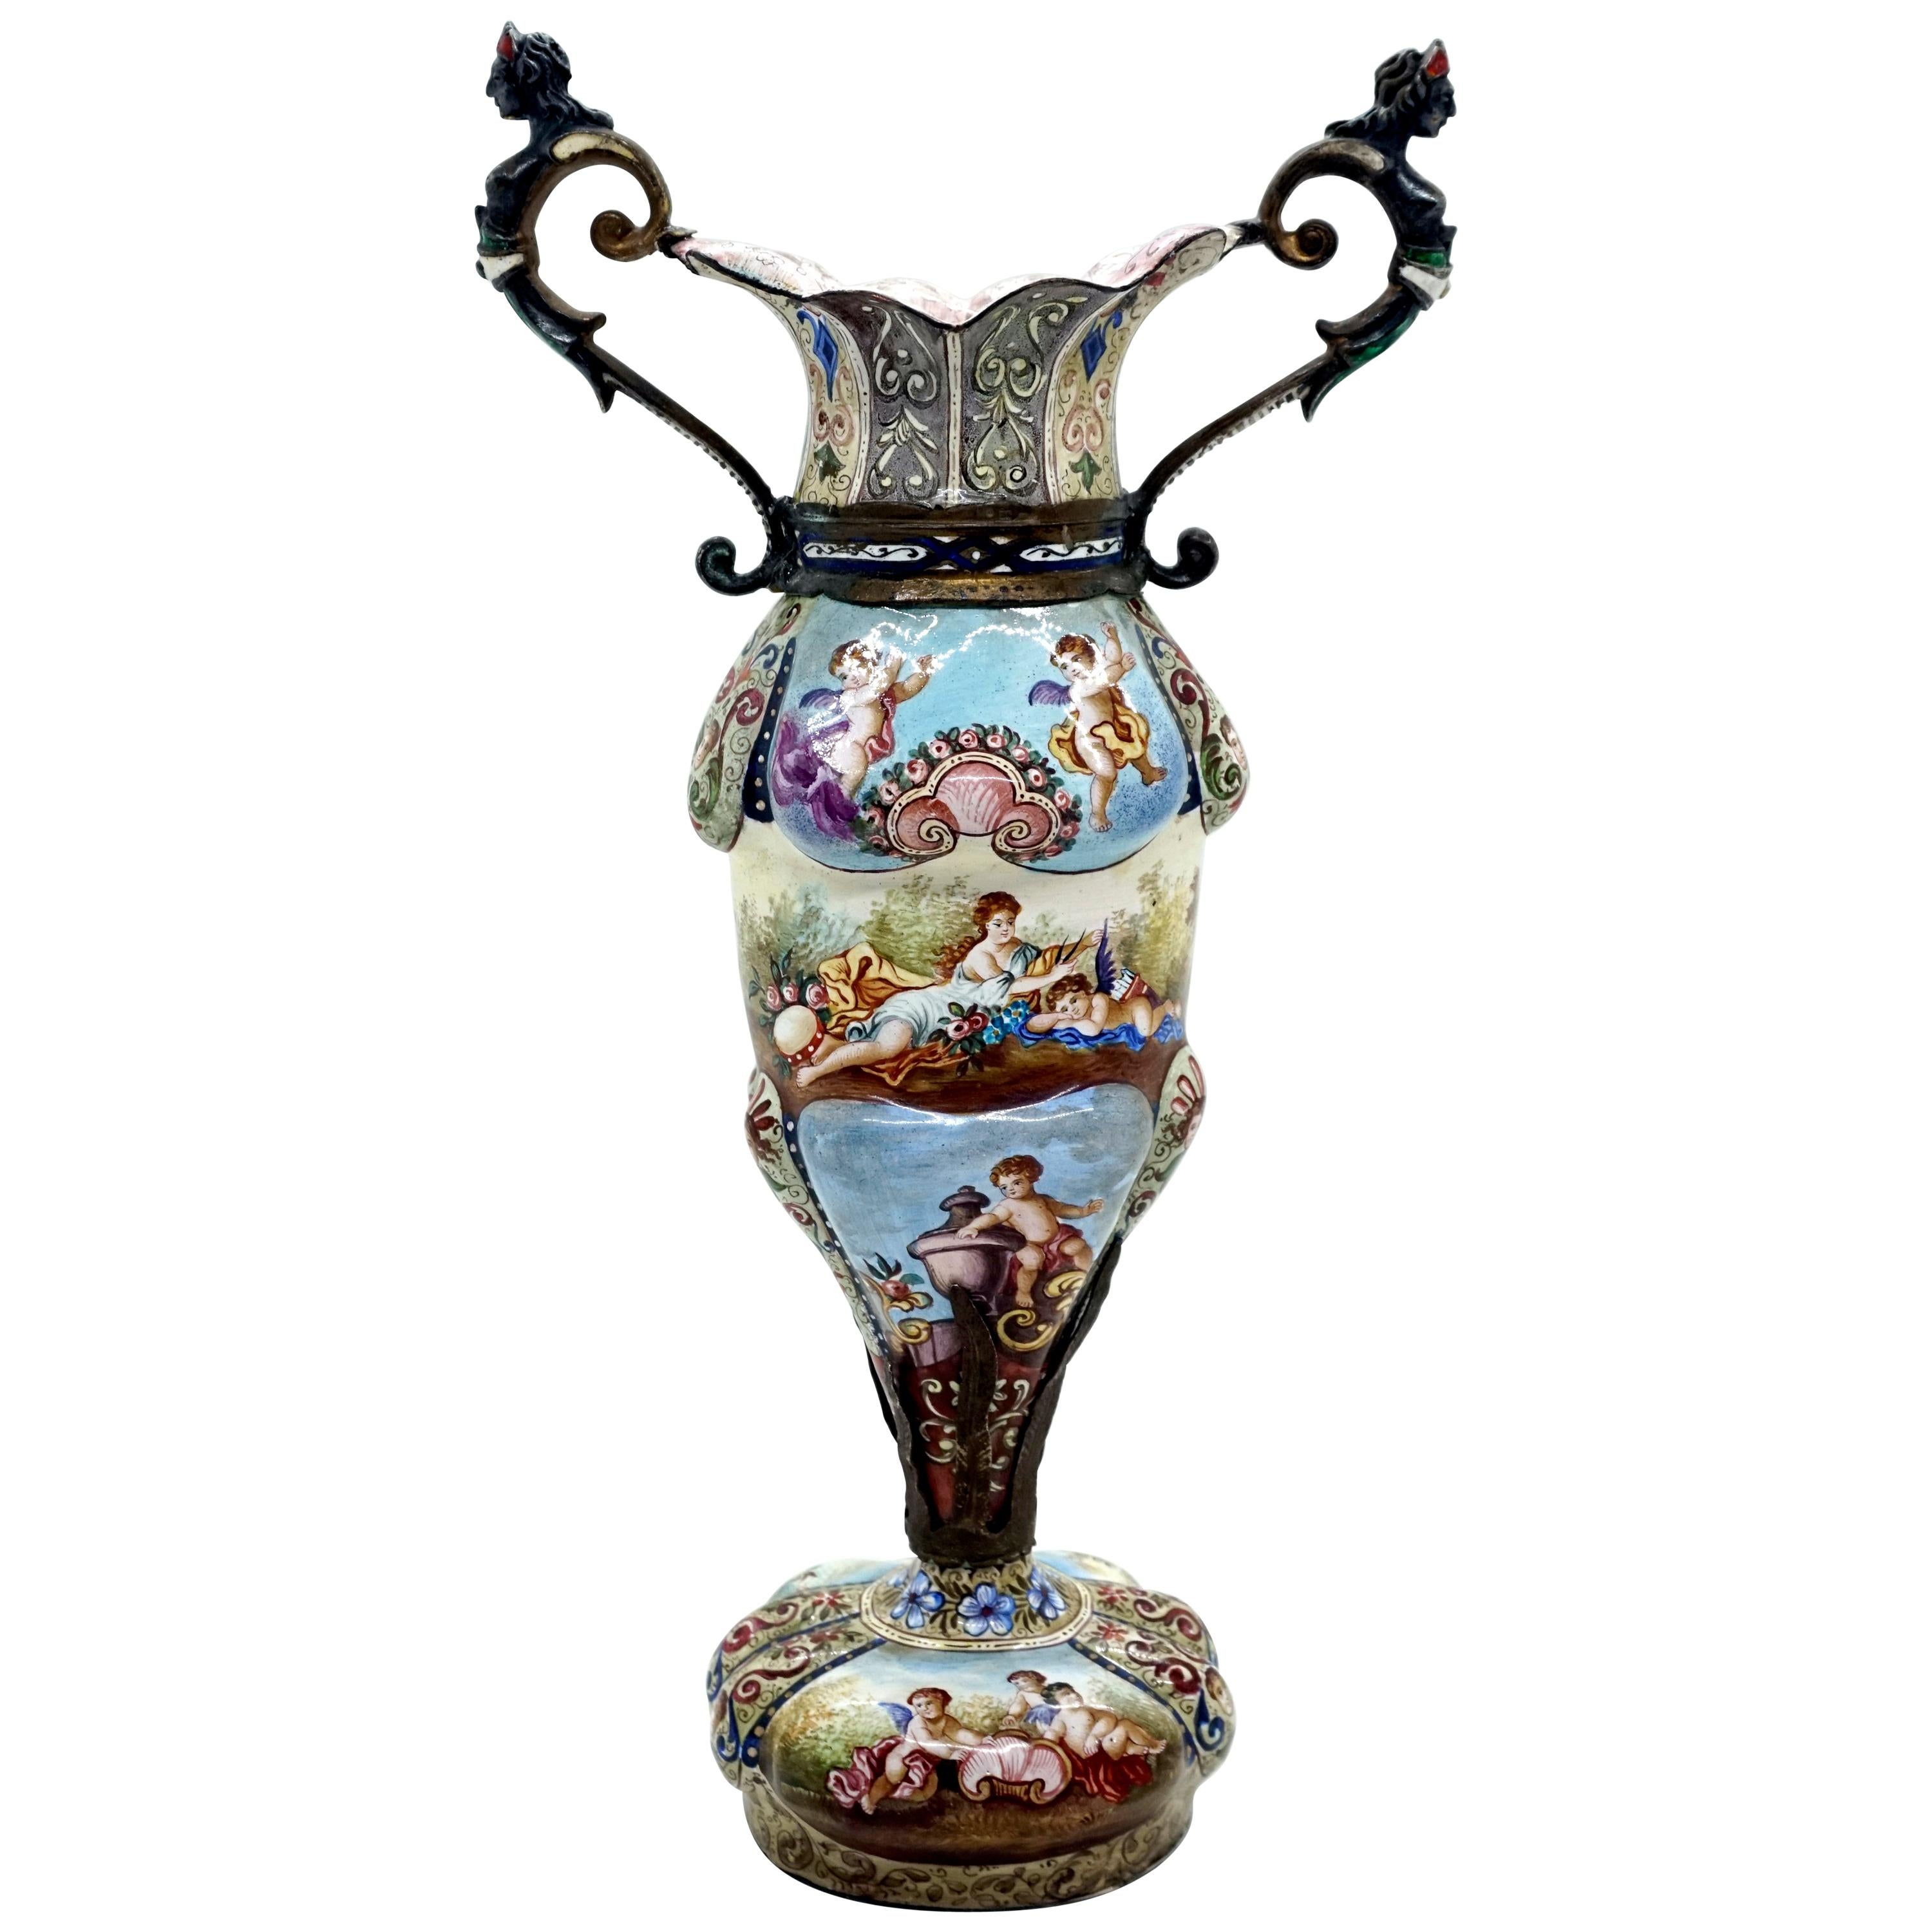 Finest 19th Century Viennese Enamel Amphora with Cupids and Antique Scenes